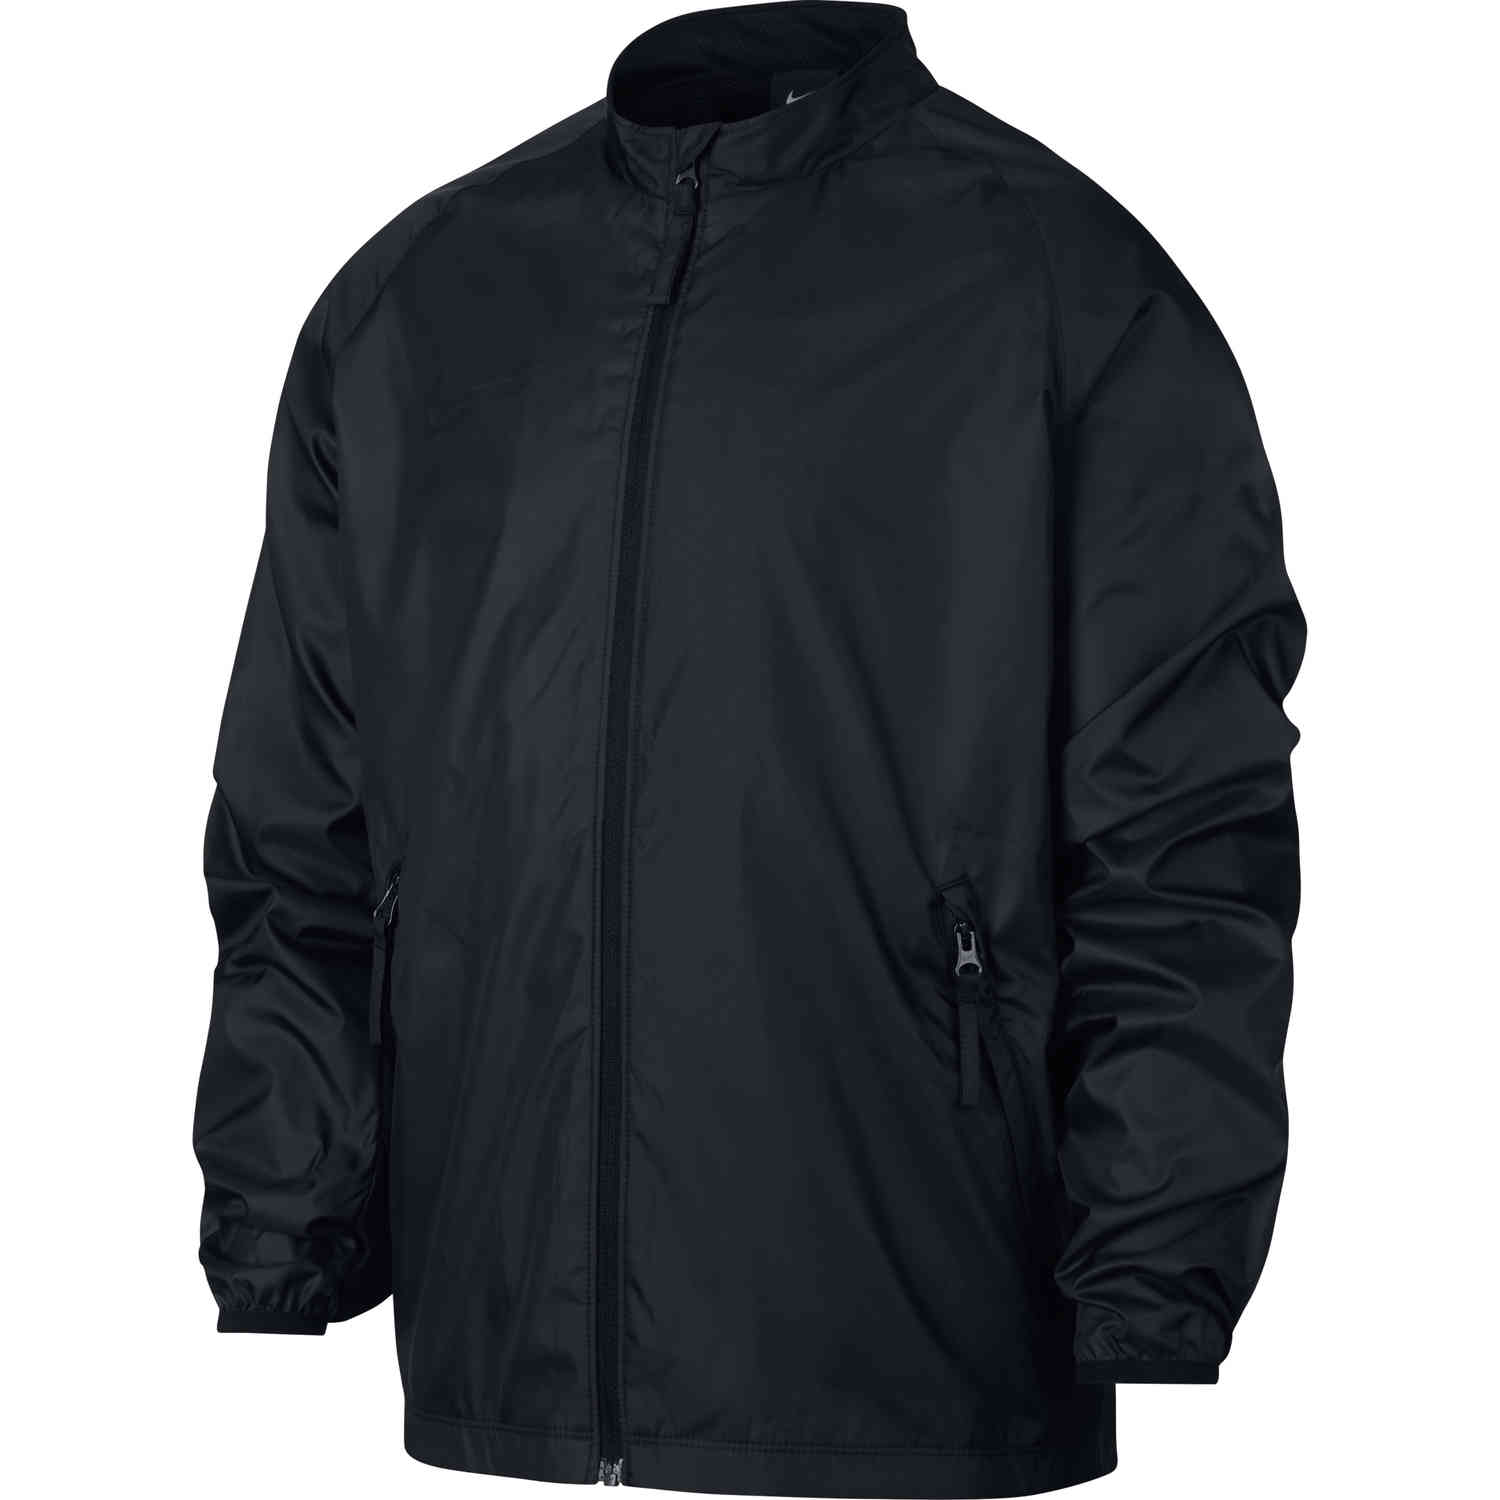 Youth Nike Repel Academy Jacket - Black - Soccer Master